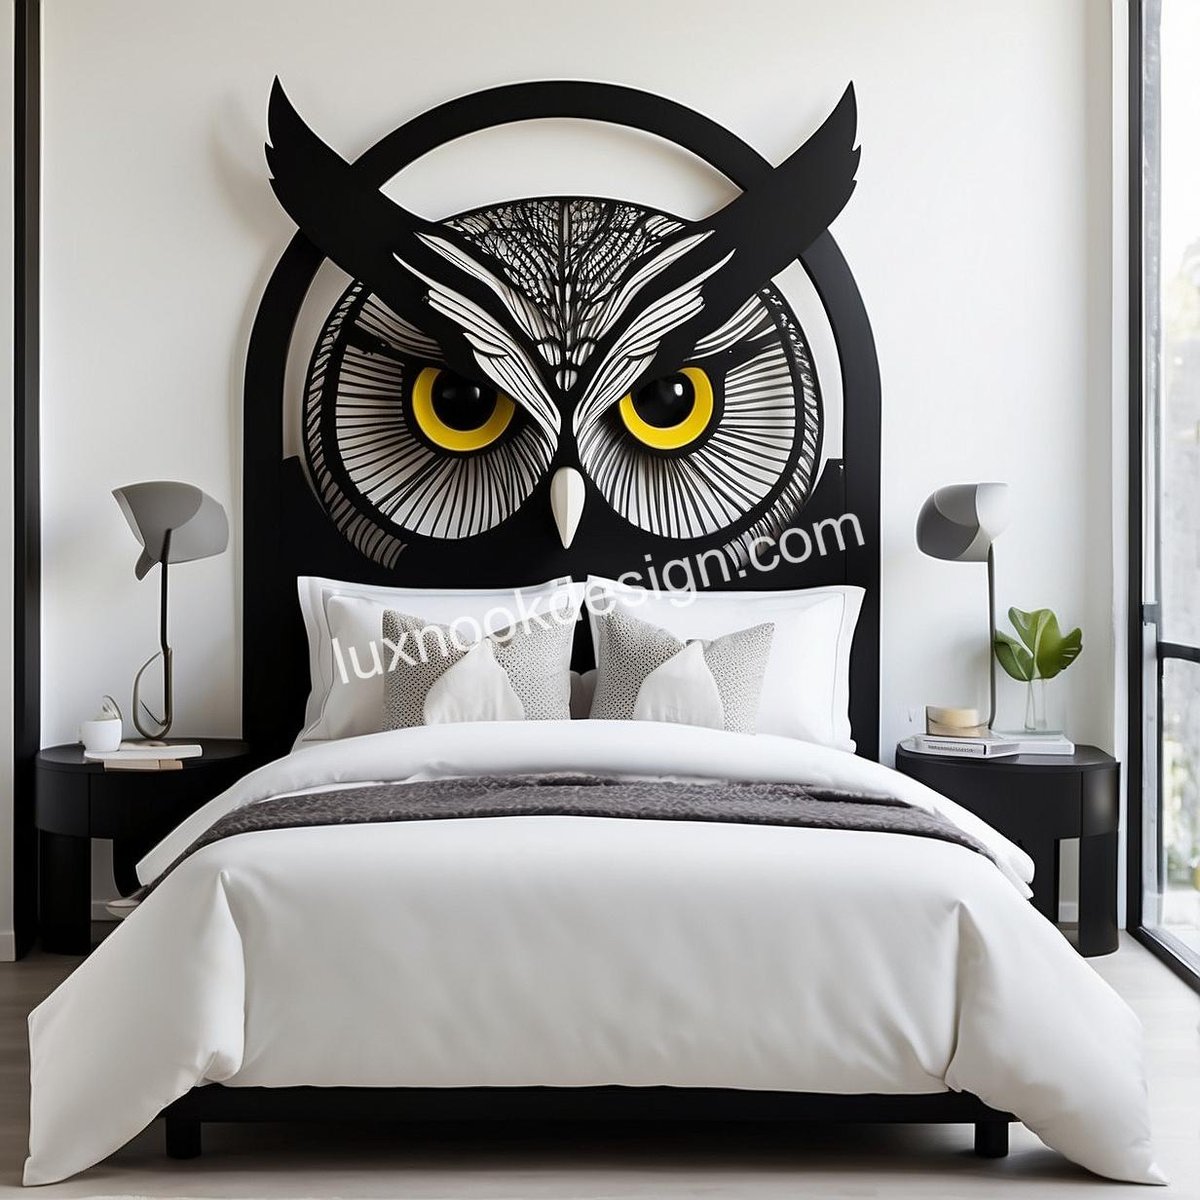 Night owls rejoice! 🌌 Who would love to wake up feeling wise and refreshed in this owl bed? Show some love with a like! #homedecor #homedesign #interiordesign #homeinspo #bedroomdesign #owl